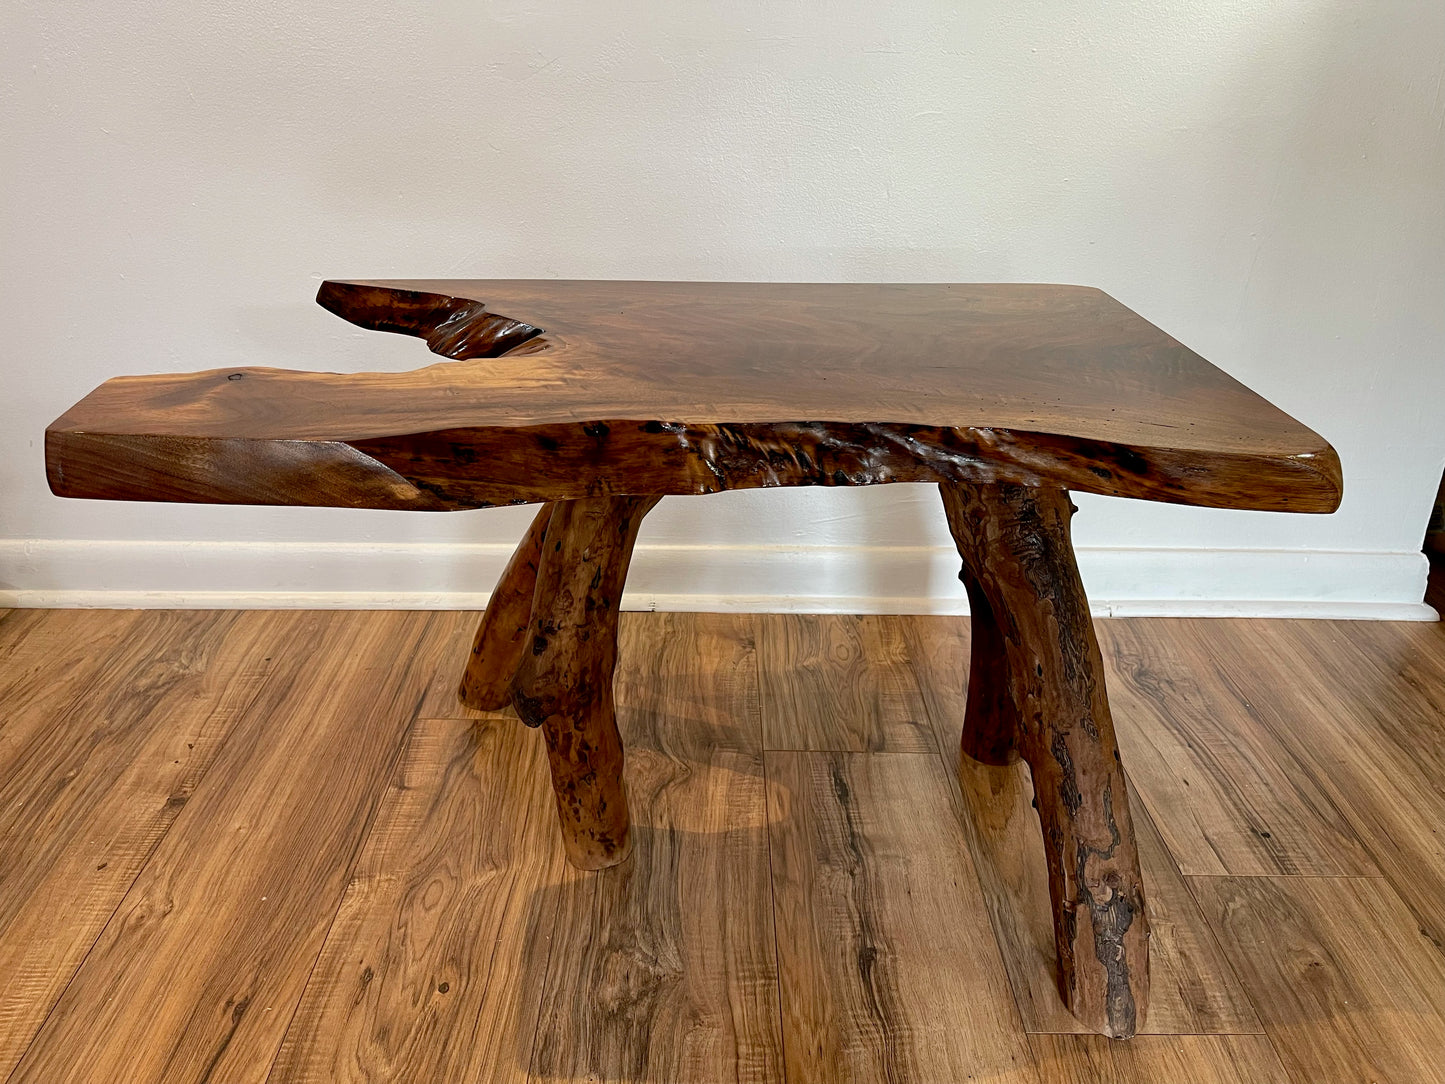 Walnut Table with wooden legs